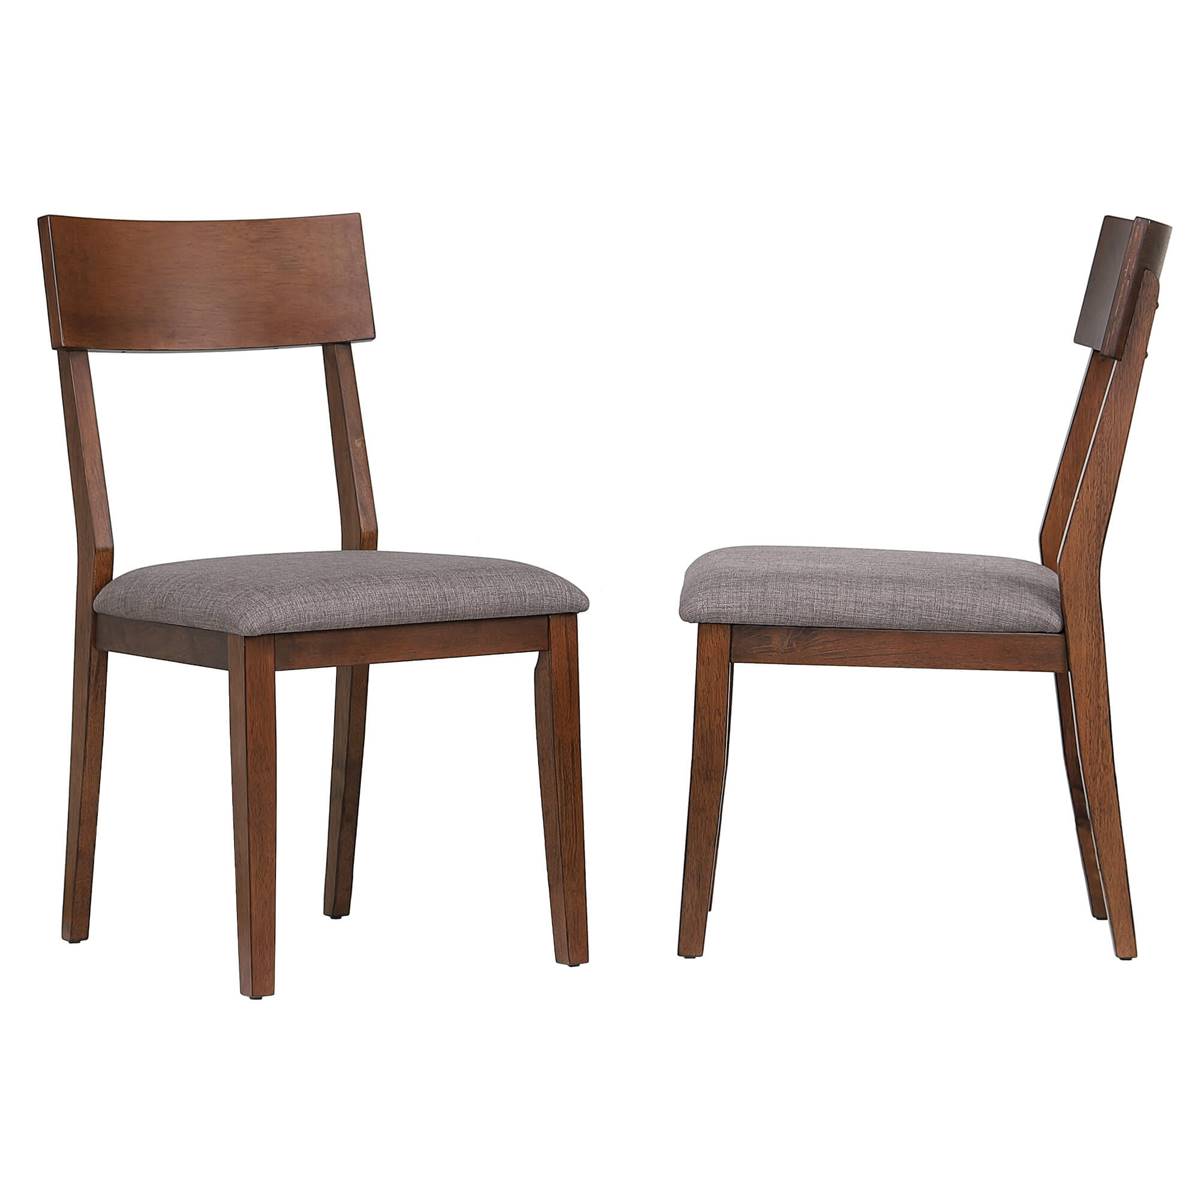 Besthom Mid-Century Upholstered Dining Chairs - Set Of 2